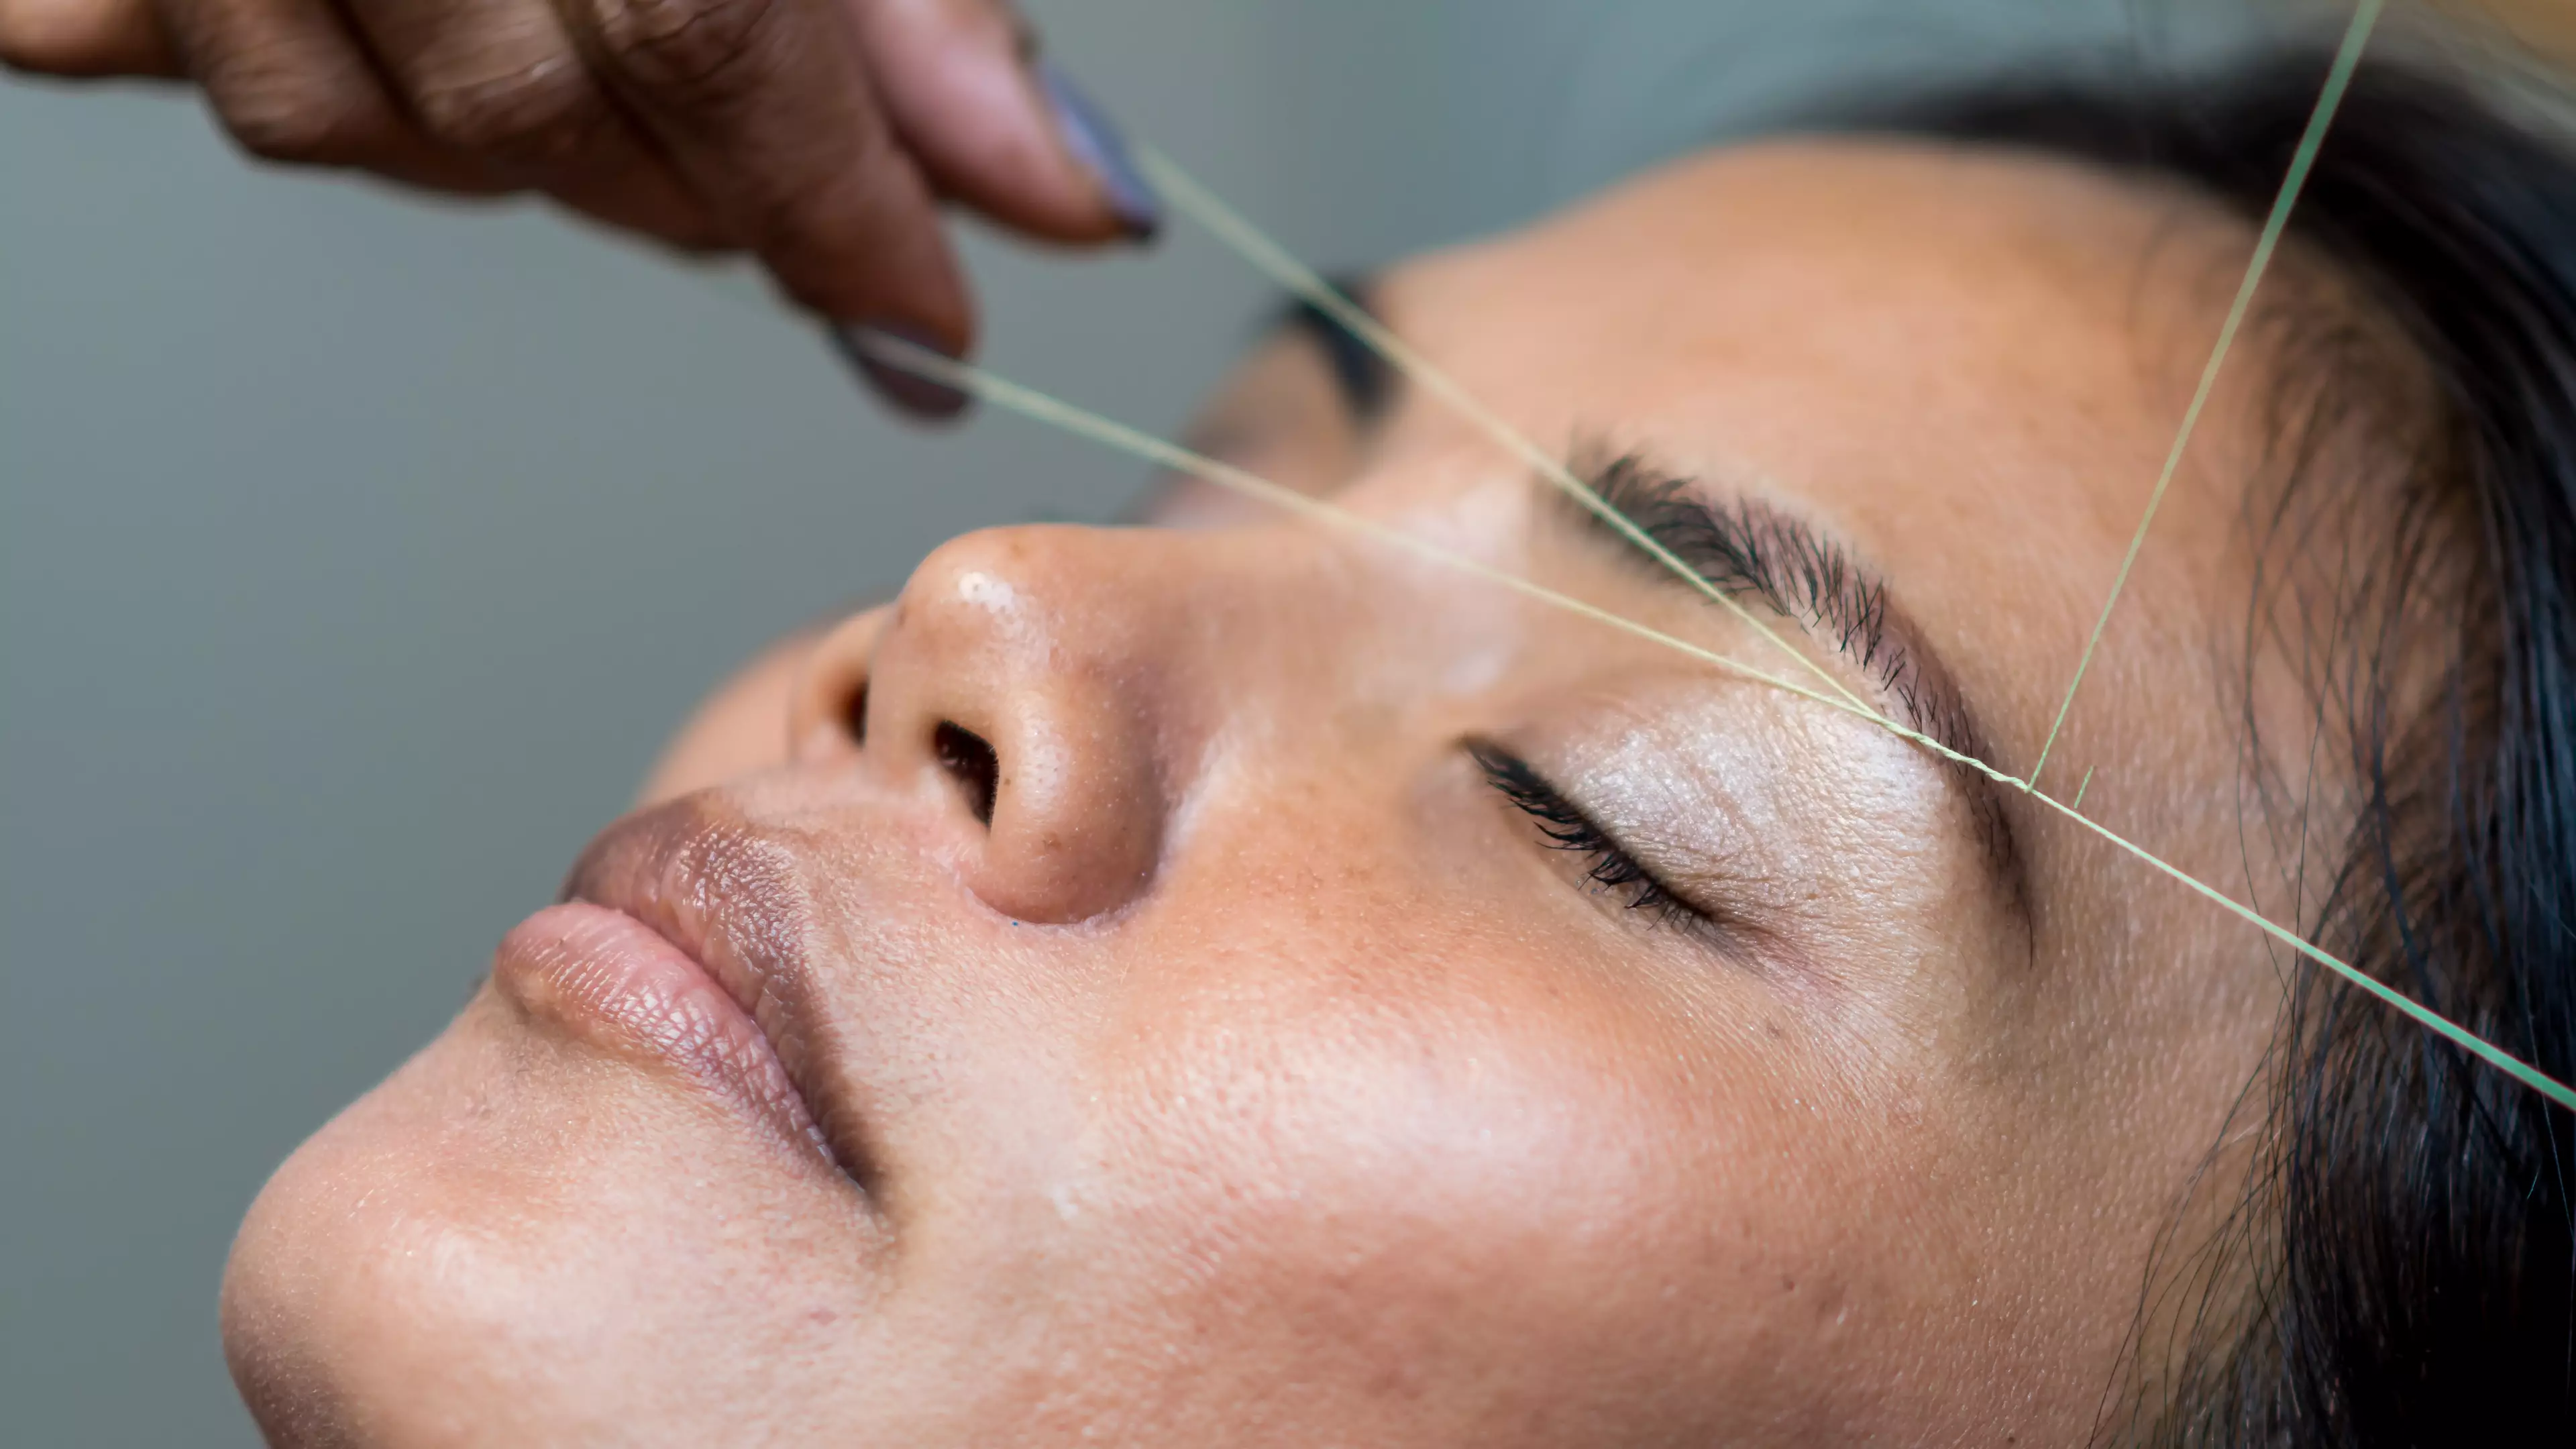 Women Are Fuming After Learning You Can't Get Your Eyebrows Waxed When Beauty Salons Reopen